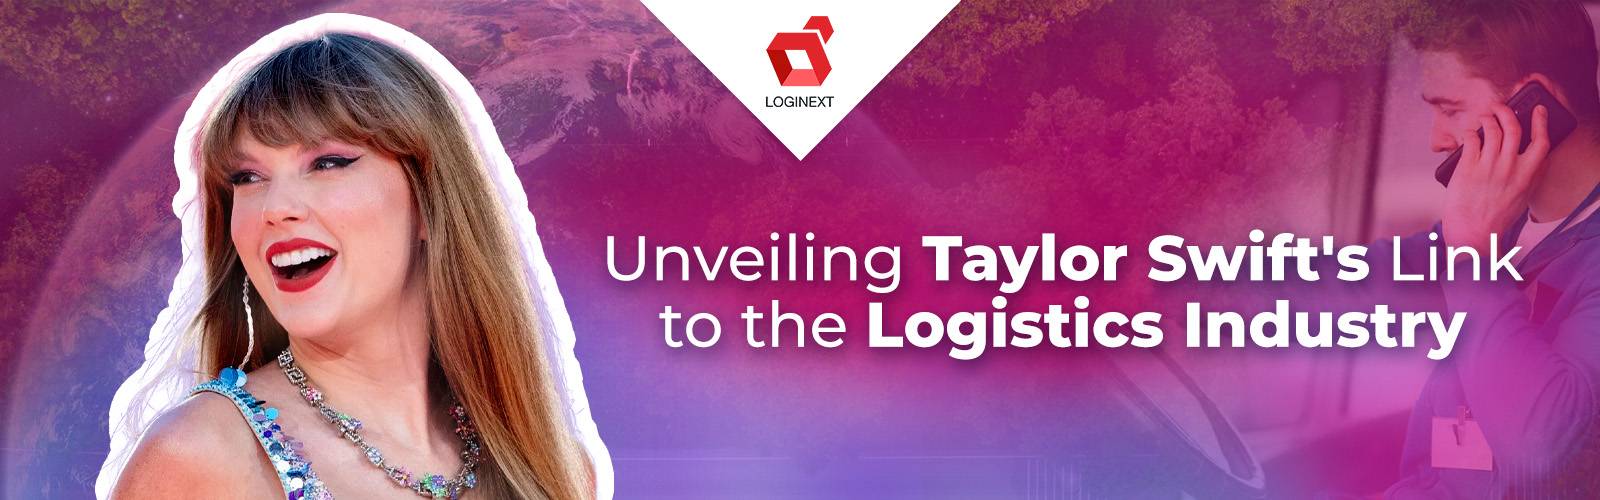 Connecting Taylor Swift's Music and the Logistics Industry